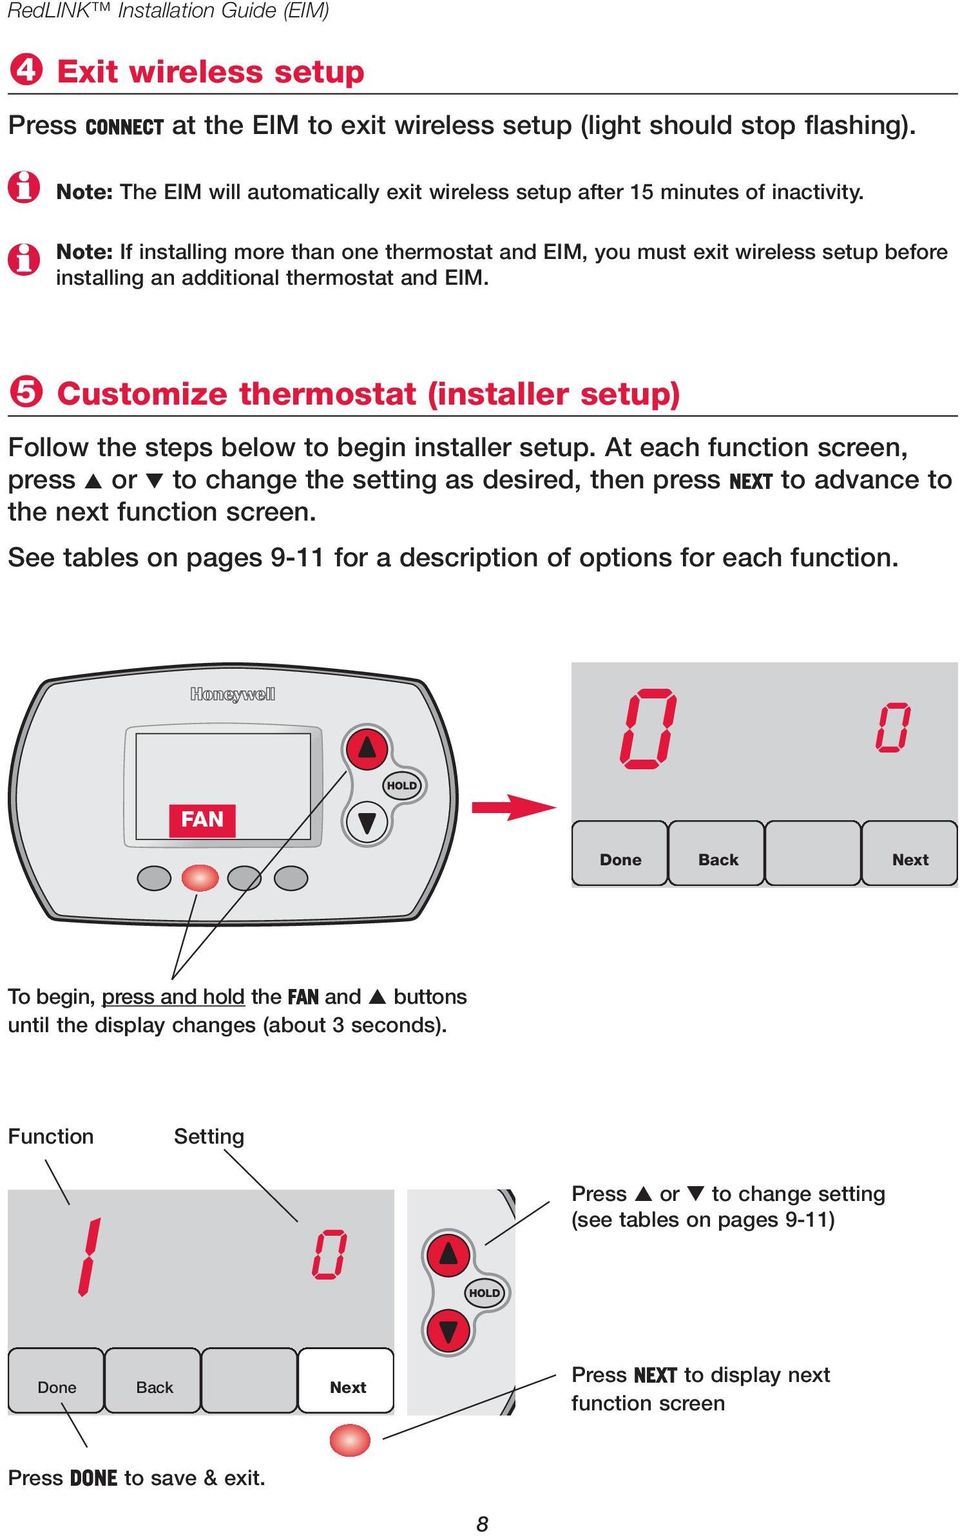 Note: If installing more than one thermostat and EIM, you must exit wireless setup before installing an additional thermostat and EIM.